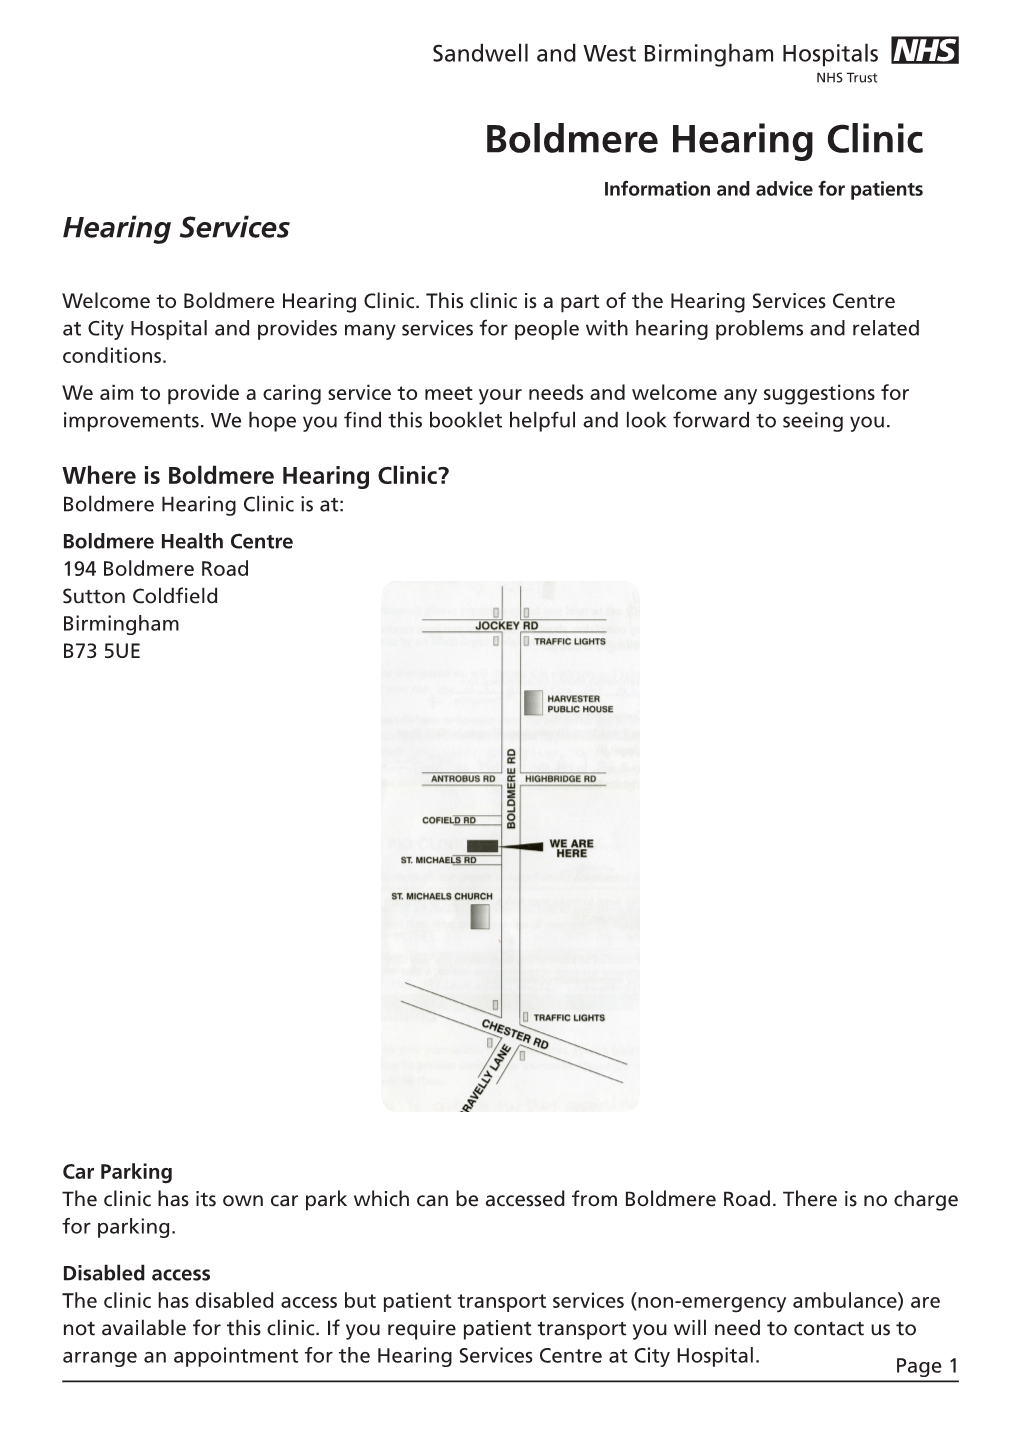 Boldmere Hearing Clinic Information and Advice for Patients Hearing Services